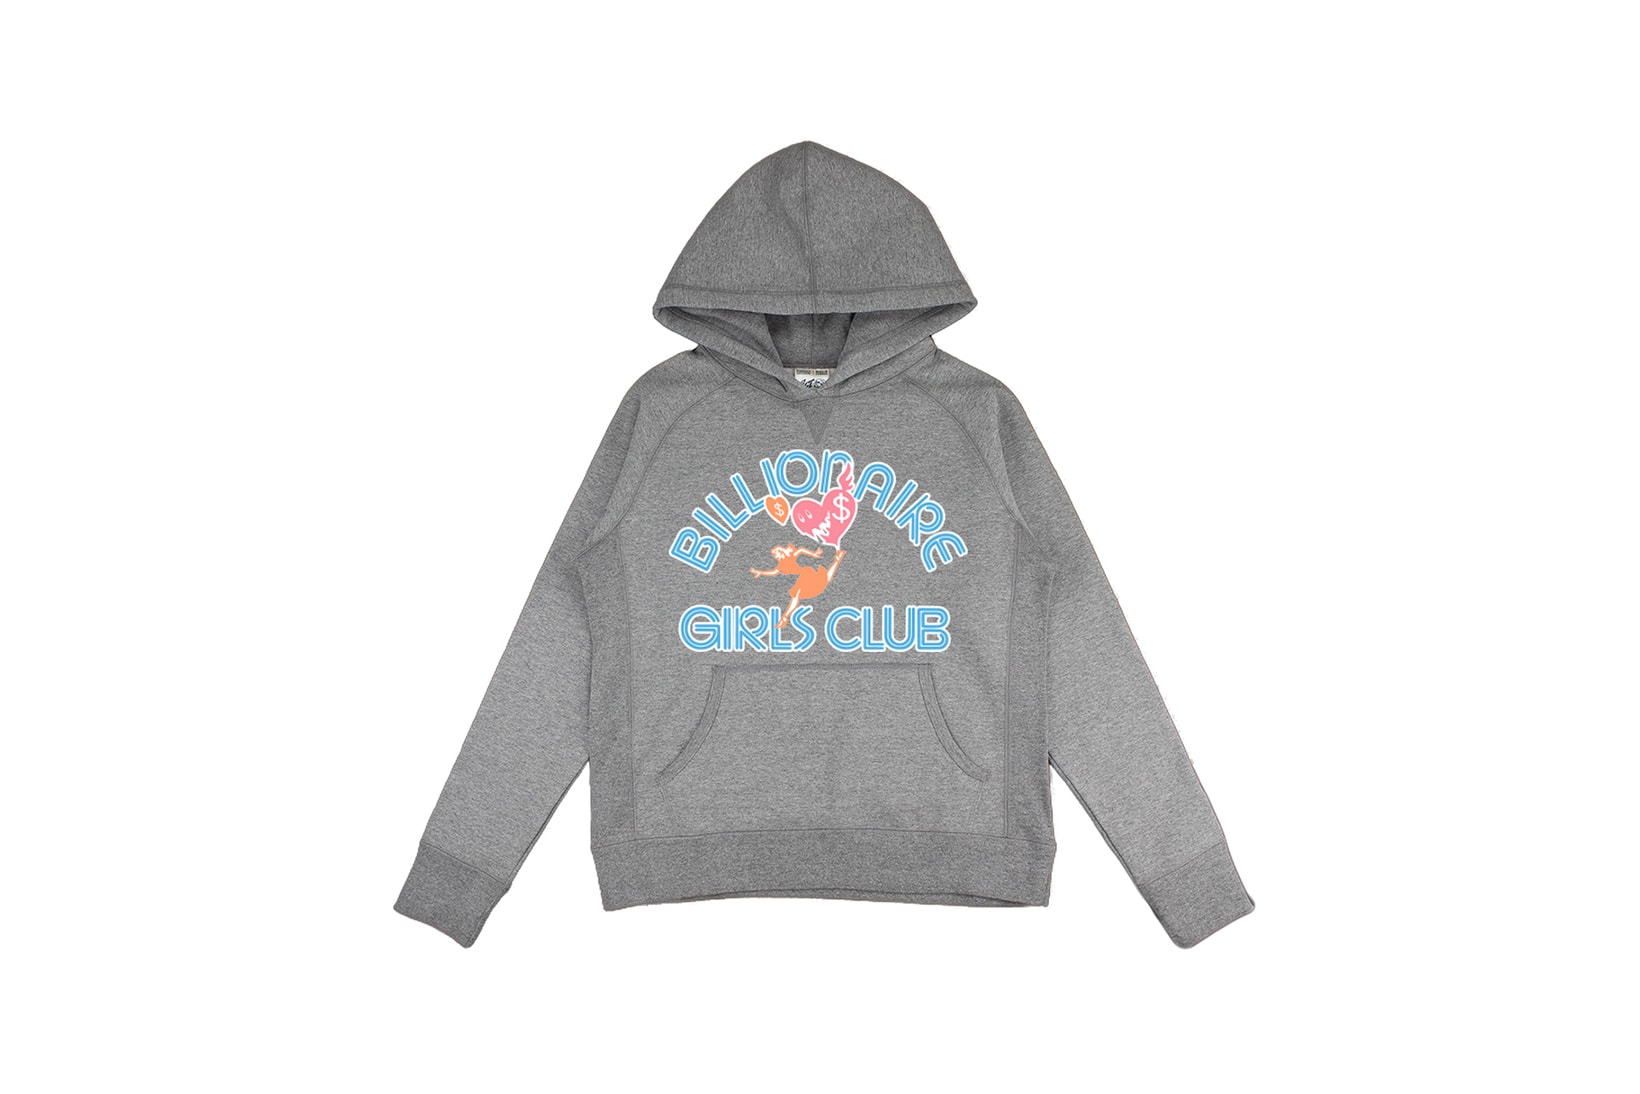 Billionaire Girls Club Relaunch Capsule Collection Hoodie Grey